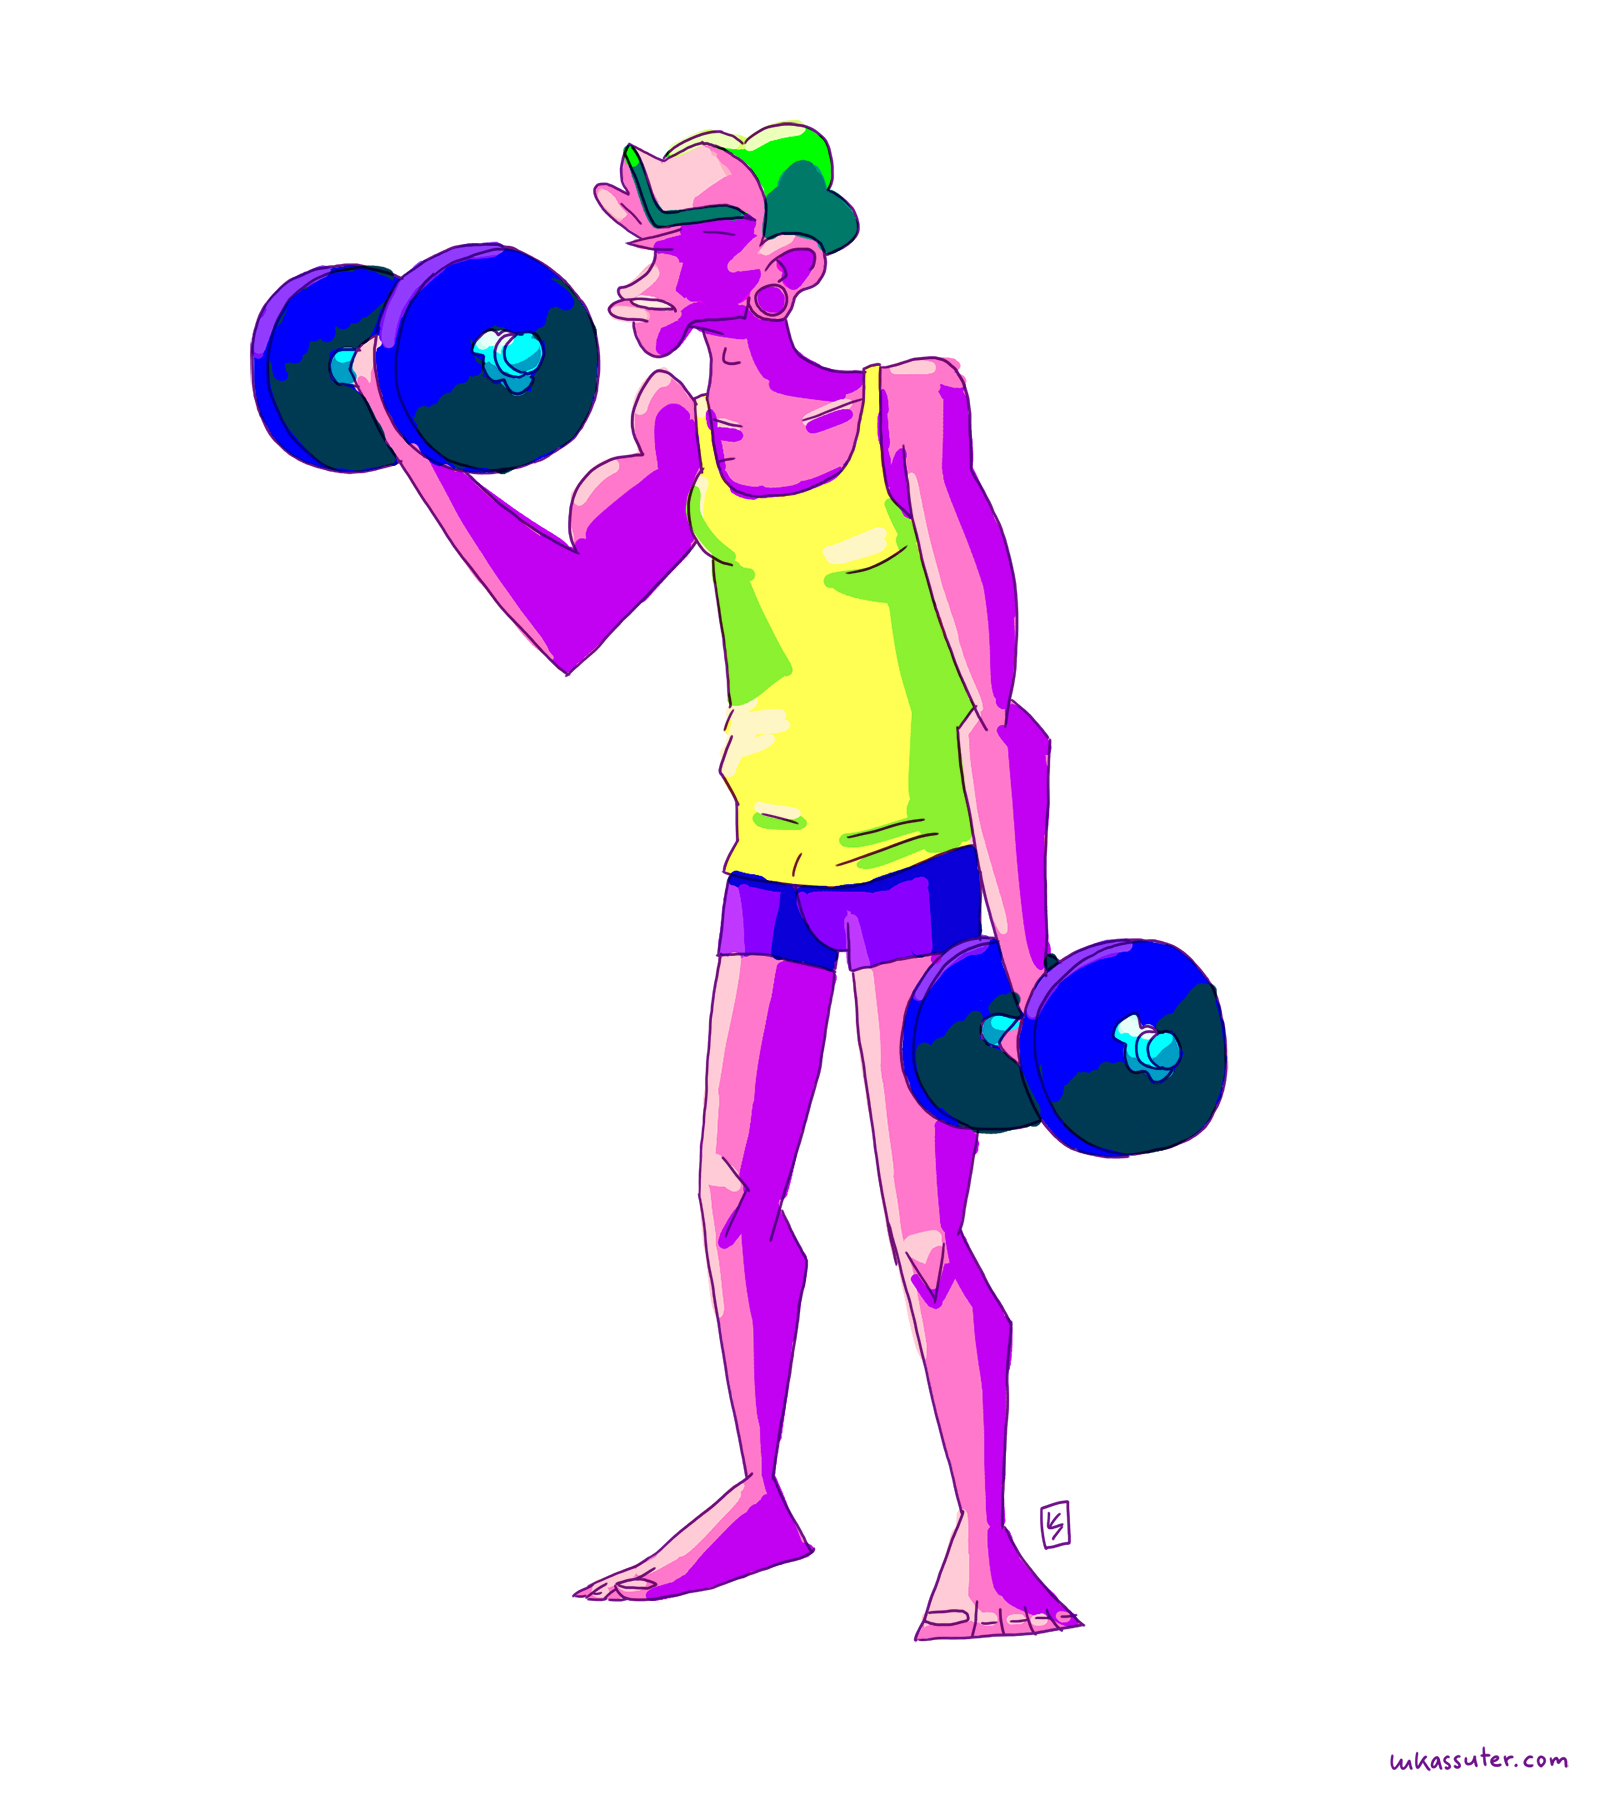 Young man with a unibrow is lifting weights